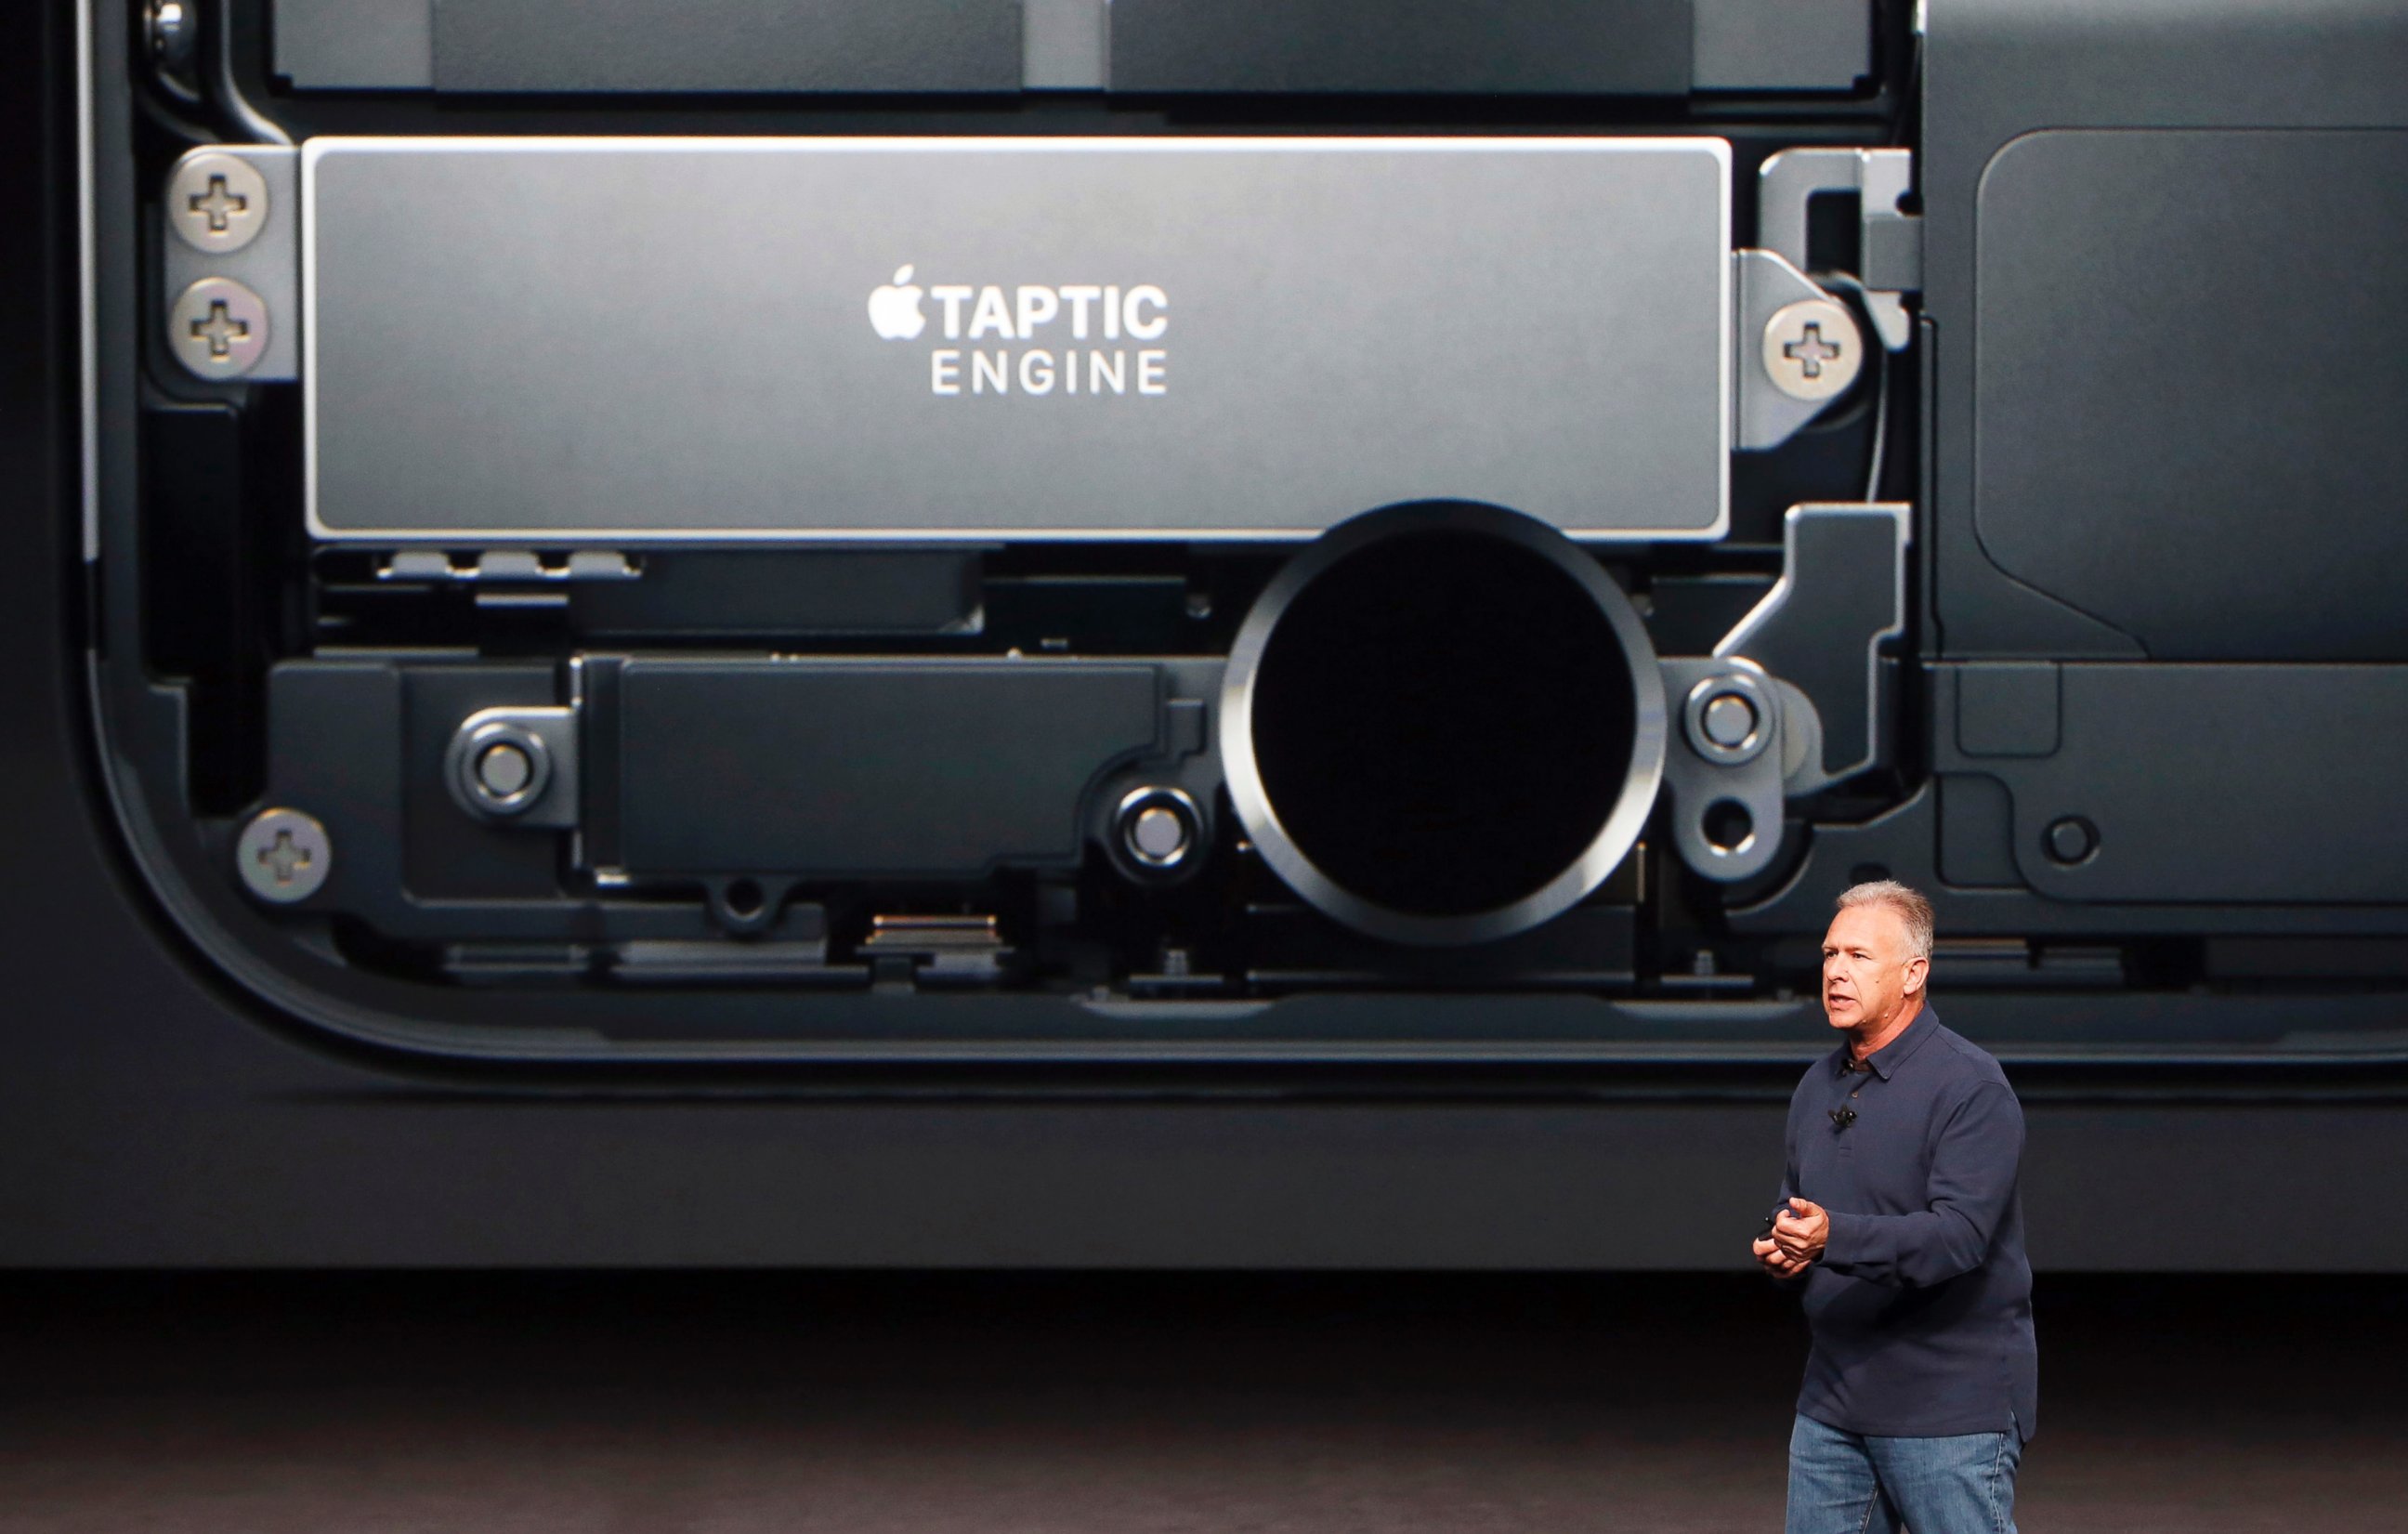 PHOTO: Phil Schiller, Senior Vice President of Worldwide Marketing at Apple Inc, discusses the redesigned home button on the iPhone7 during an Apple media event in San Francisco, Sept. 7, 2016.